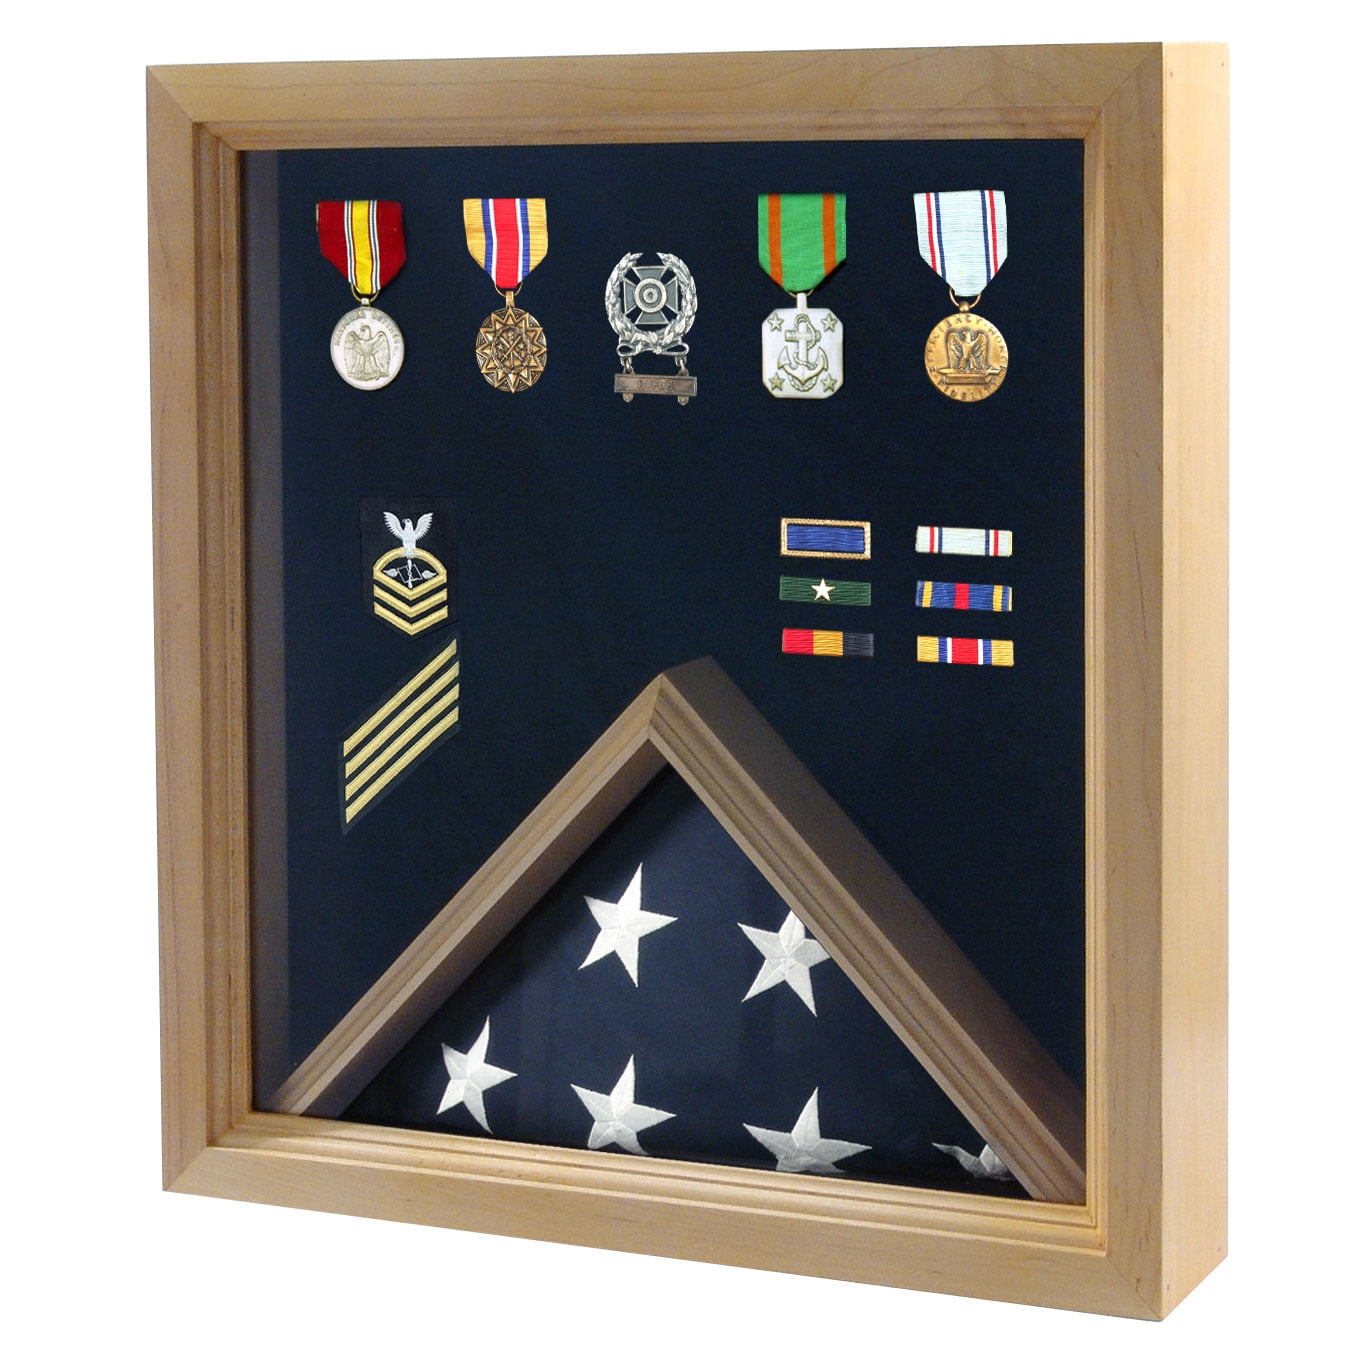 1-2 Military Medals Pins Patches Badge Insignia Display Case Box Frame Shadowbox 